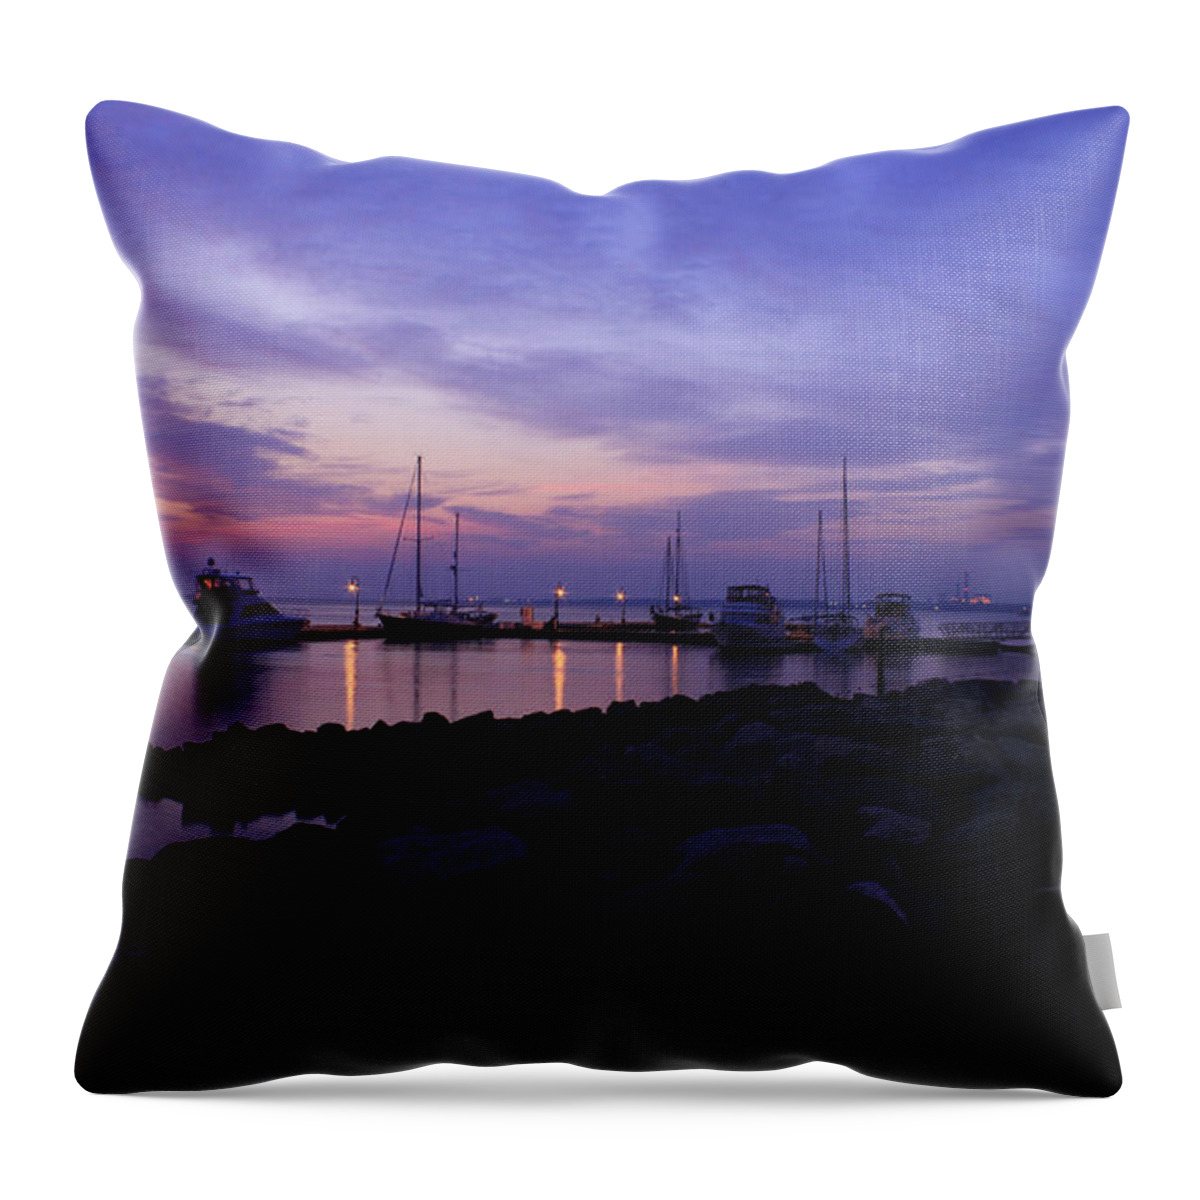 Sunday Morning Blues Throw Pillow featuring the photograph Sunday Morning Blues by Ola Allen